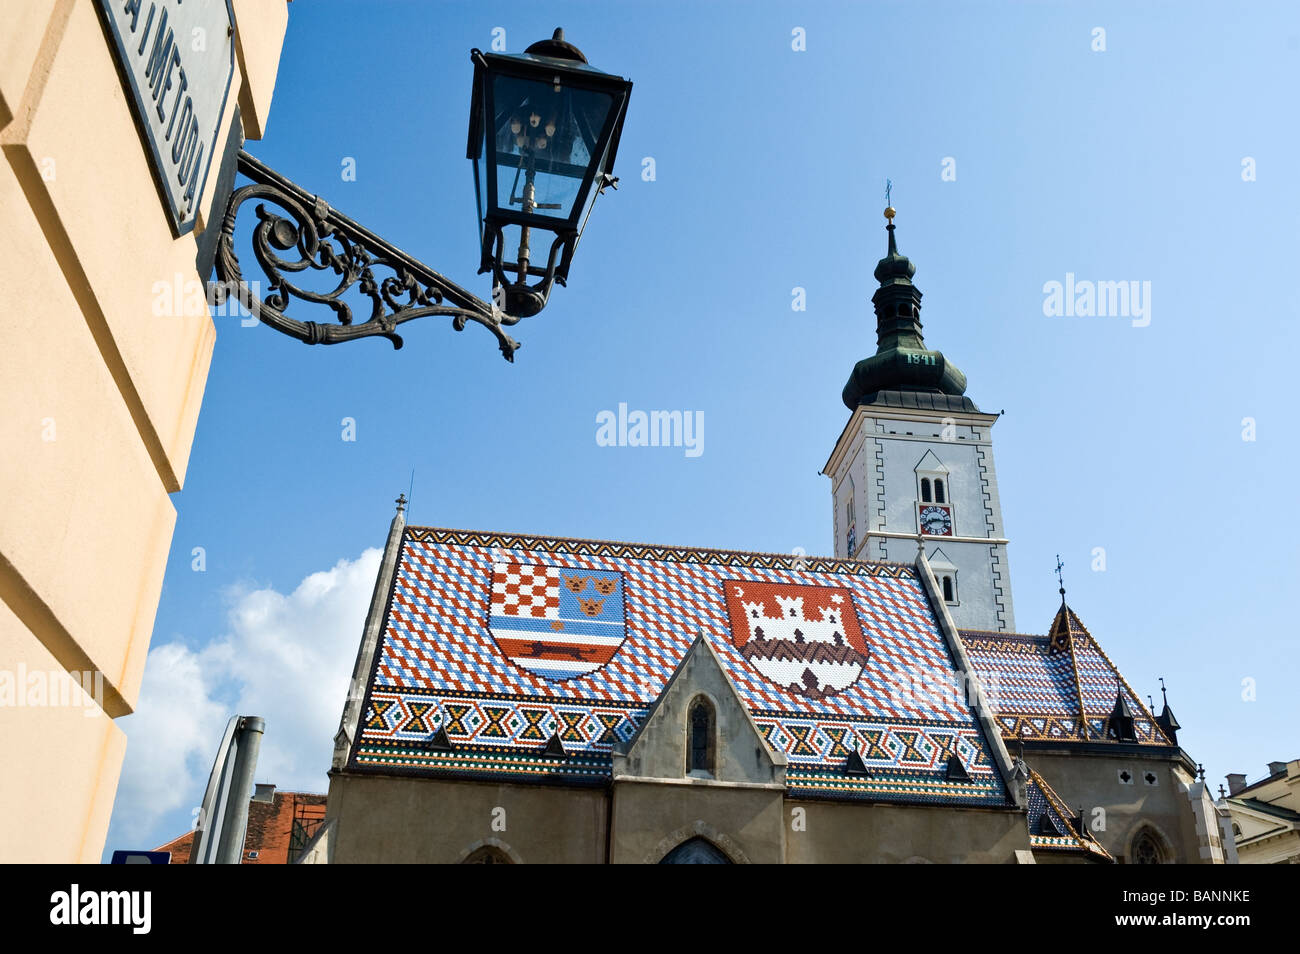 Elk192 1173 Croatia Zagreb St Mark s Church with tiled roof 1880 Stock Photo